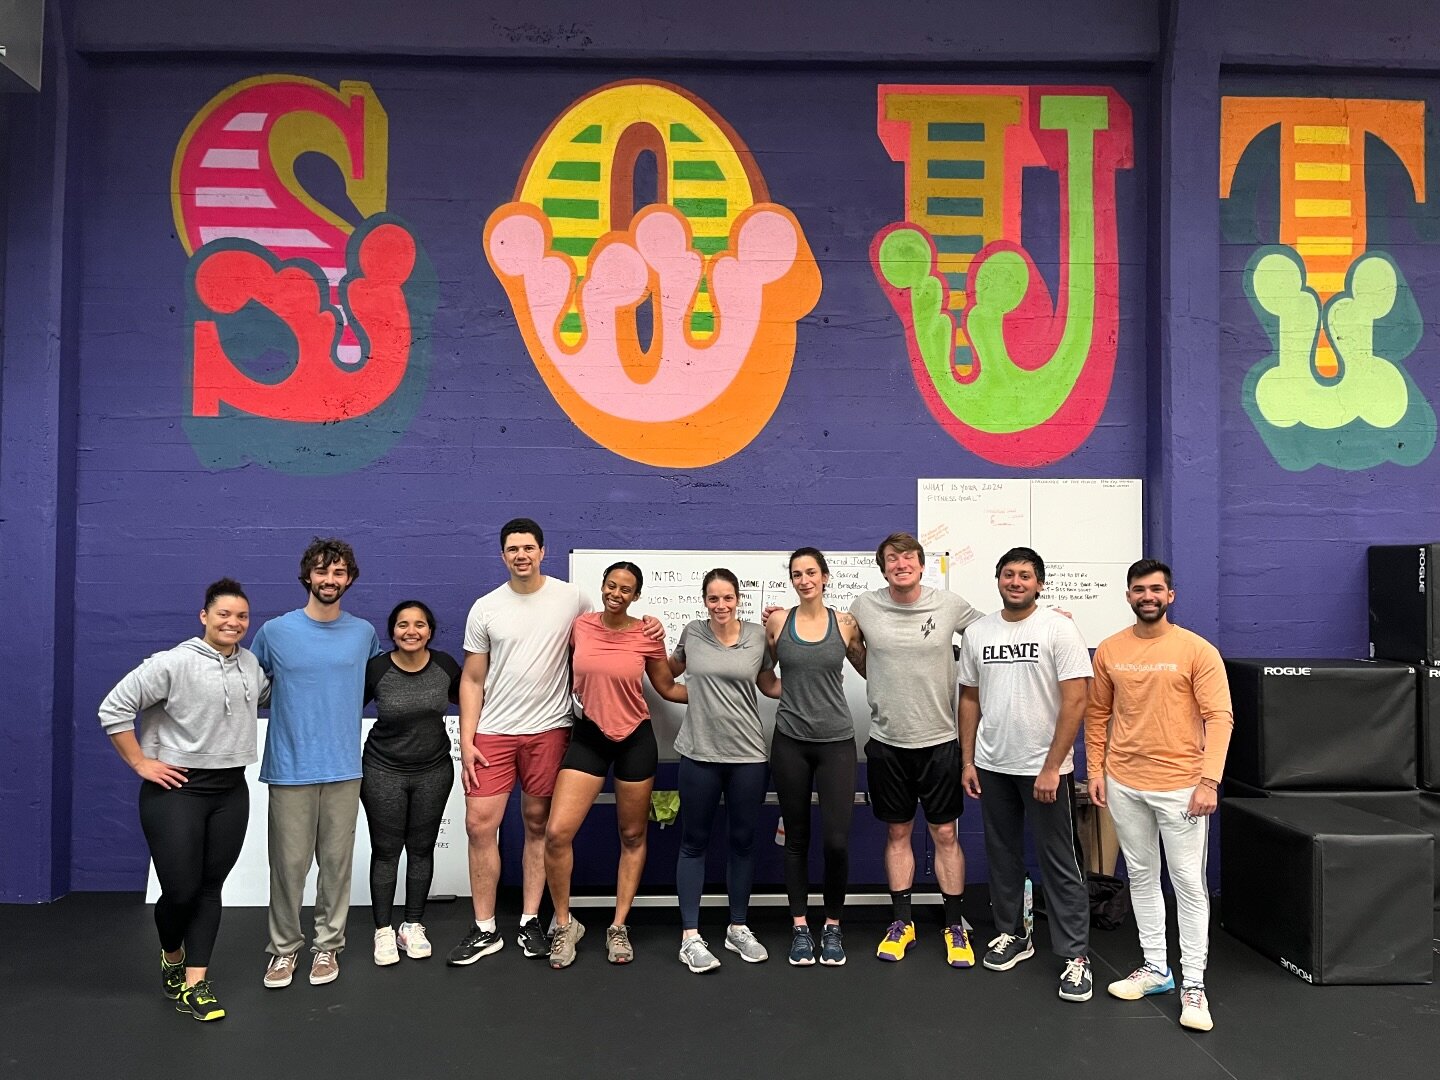 Today&rsquo;s epic Intro class. This may be our biggest ever! Athletes did the workout &ldquo;Baseline&rdquo;:

For time

500m row
40 air squats
30 situps 
20 push ups
10 pull ups 
.
.
.
#crossfit #crossfitintro #introtocrossfit #crossfitbeginner #st